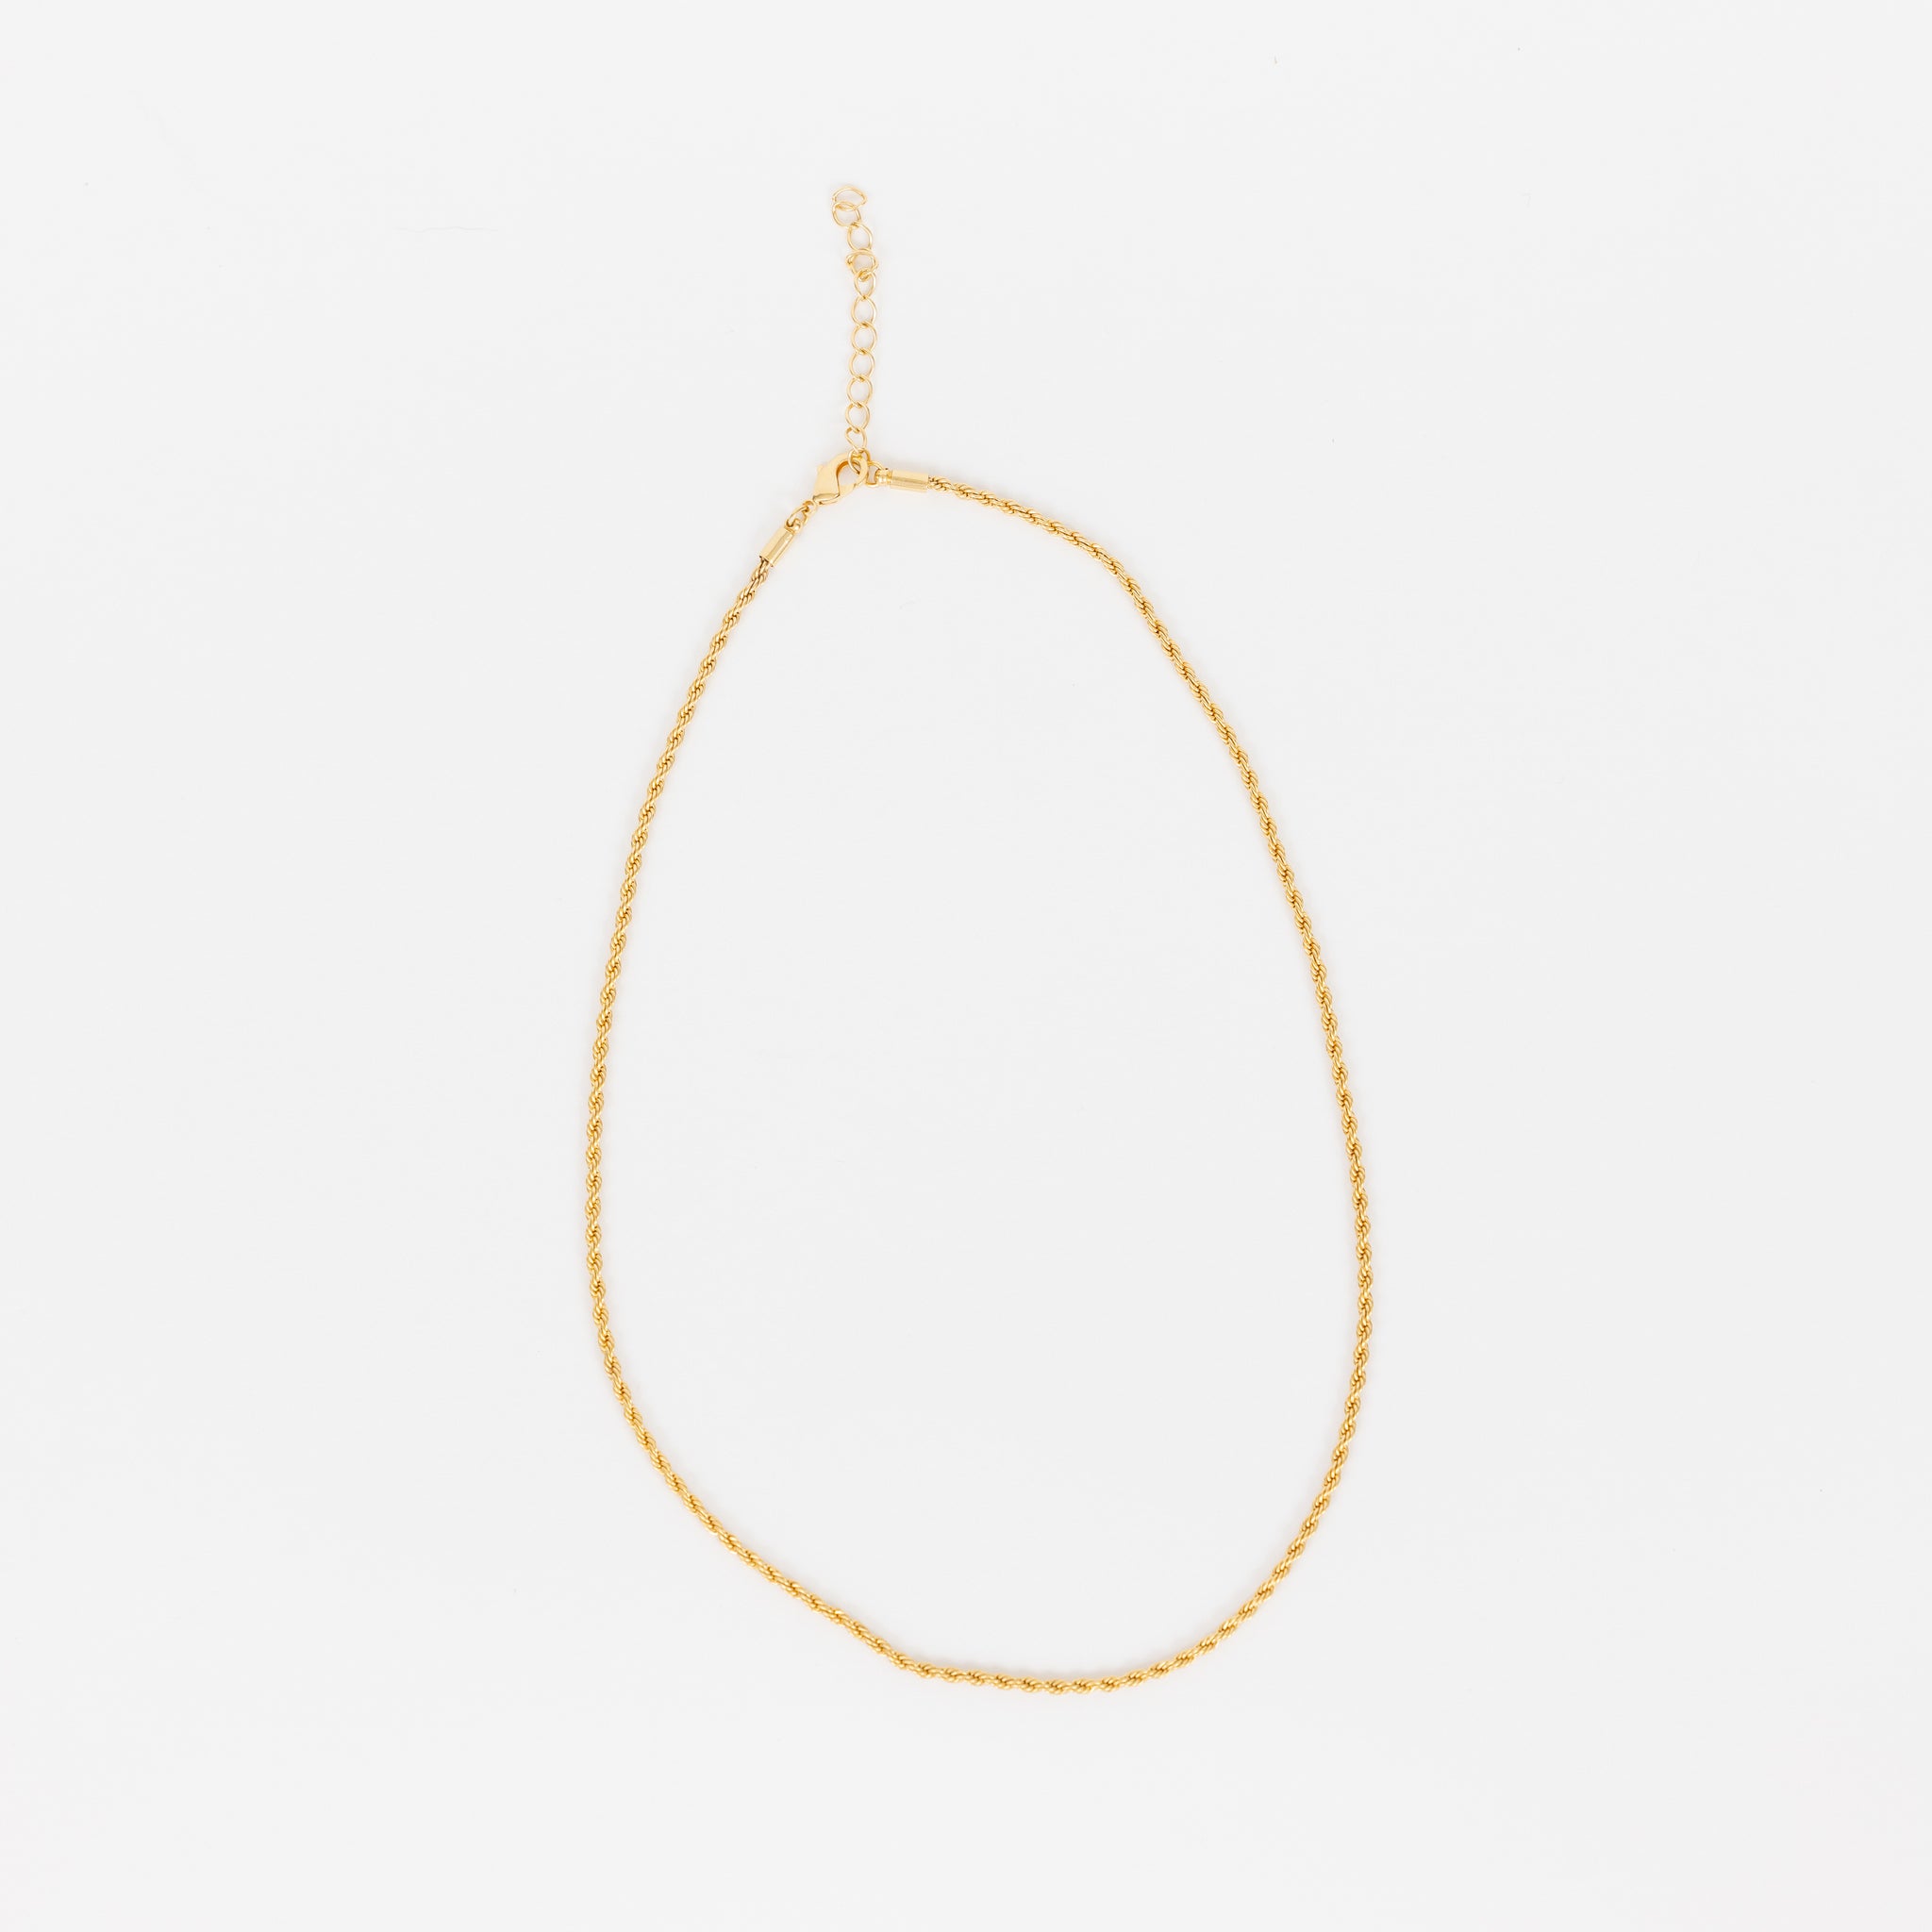 The RIVINGTON Rope Chain Necklace